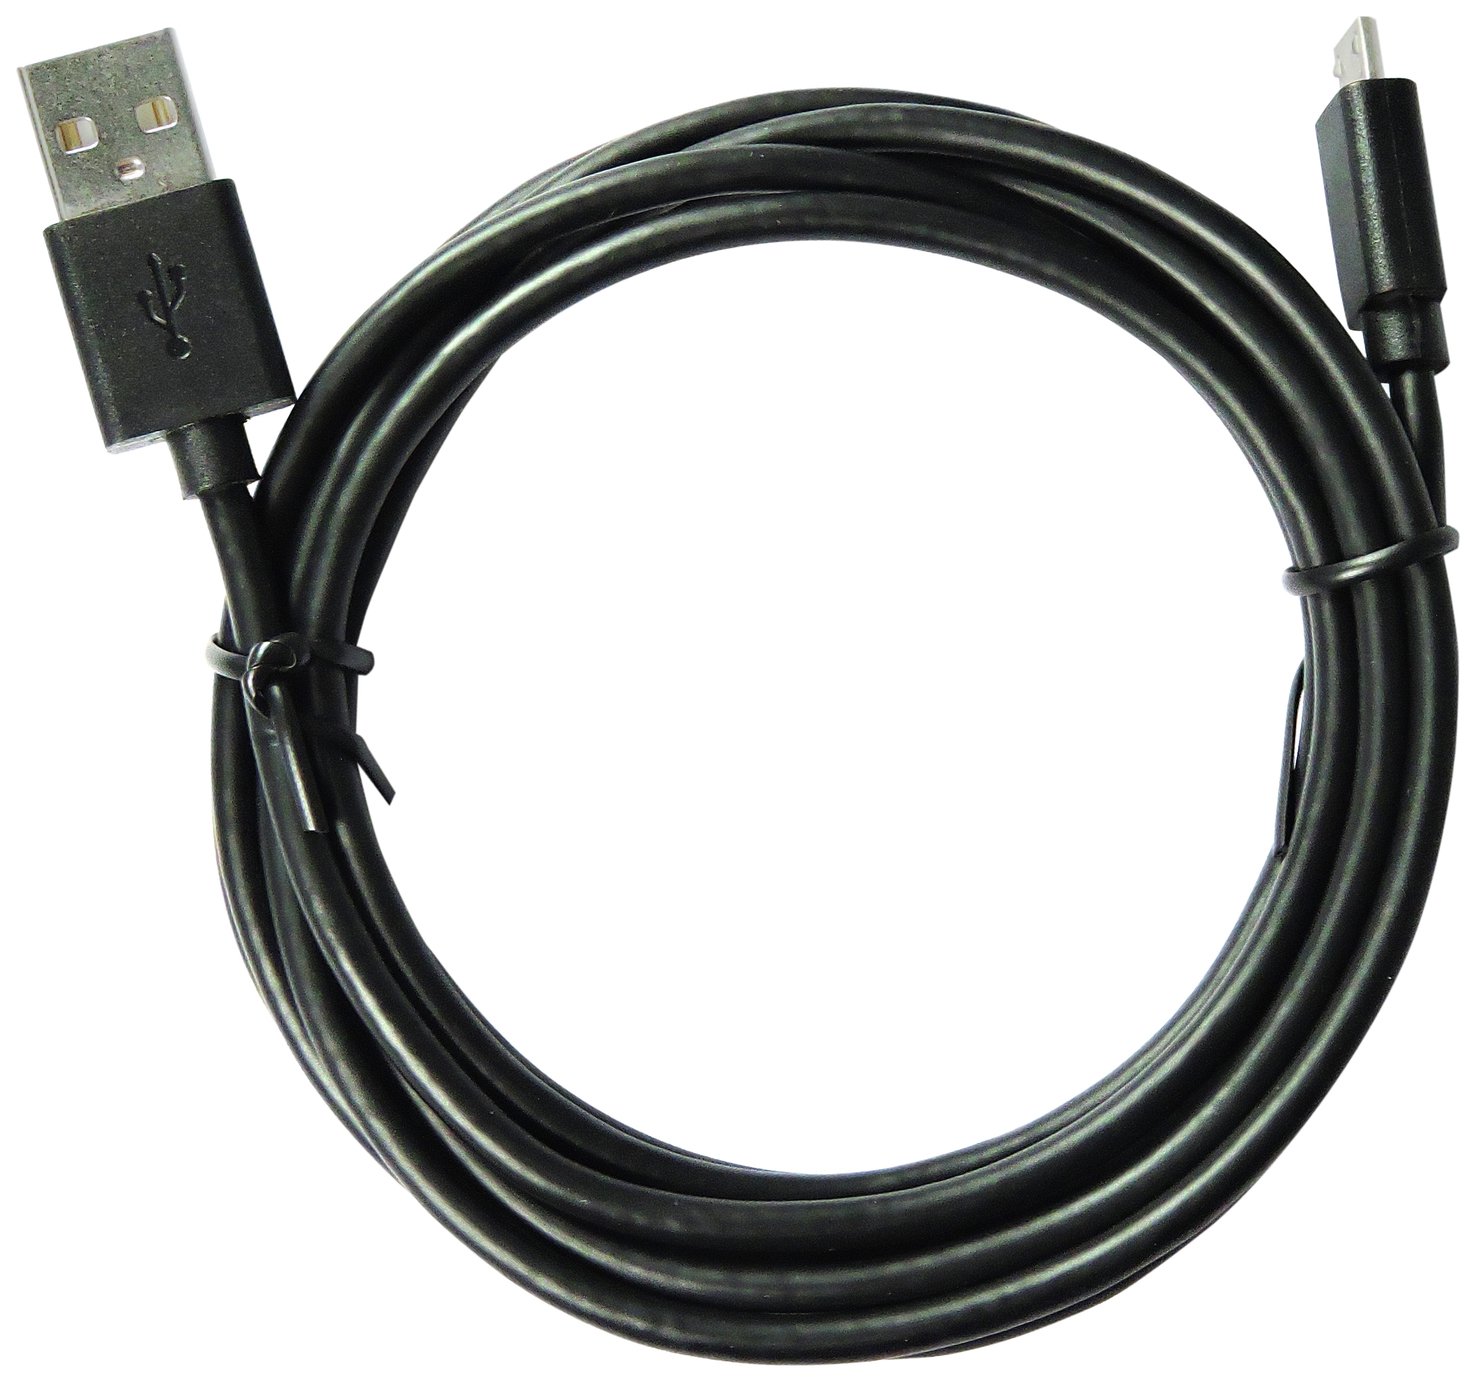 2m Micro USB Cable Review